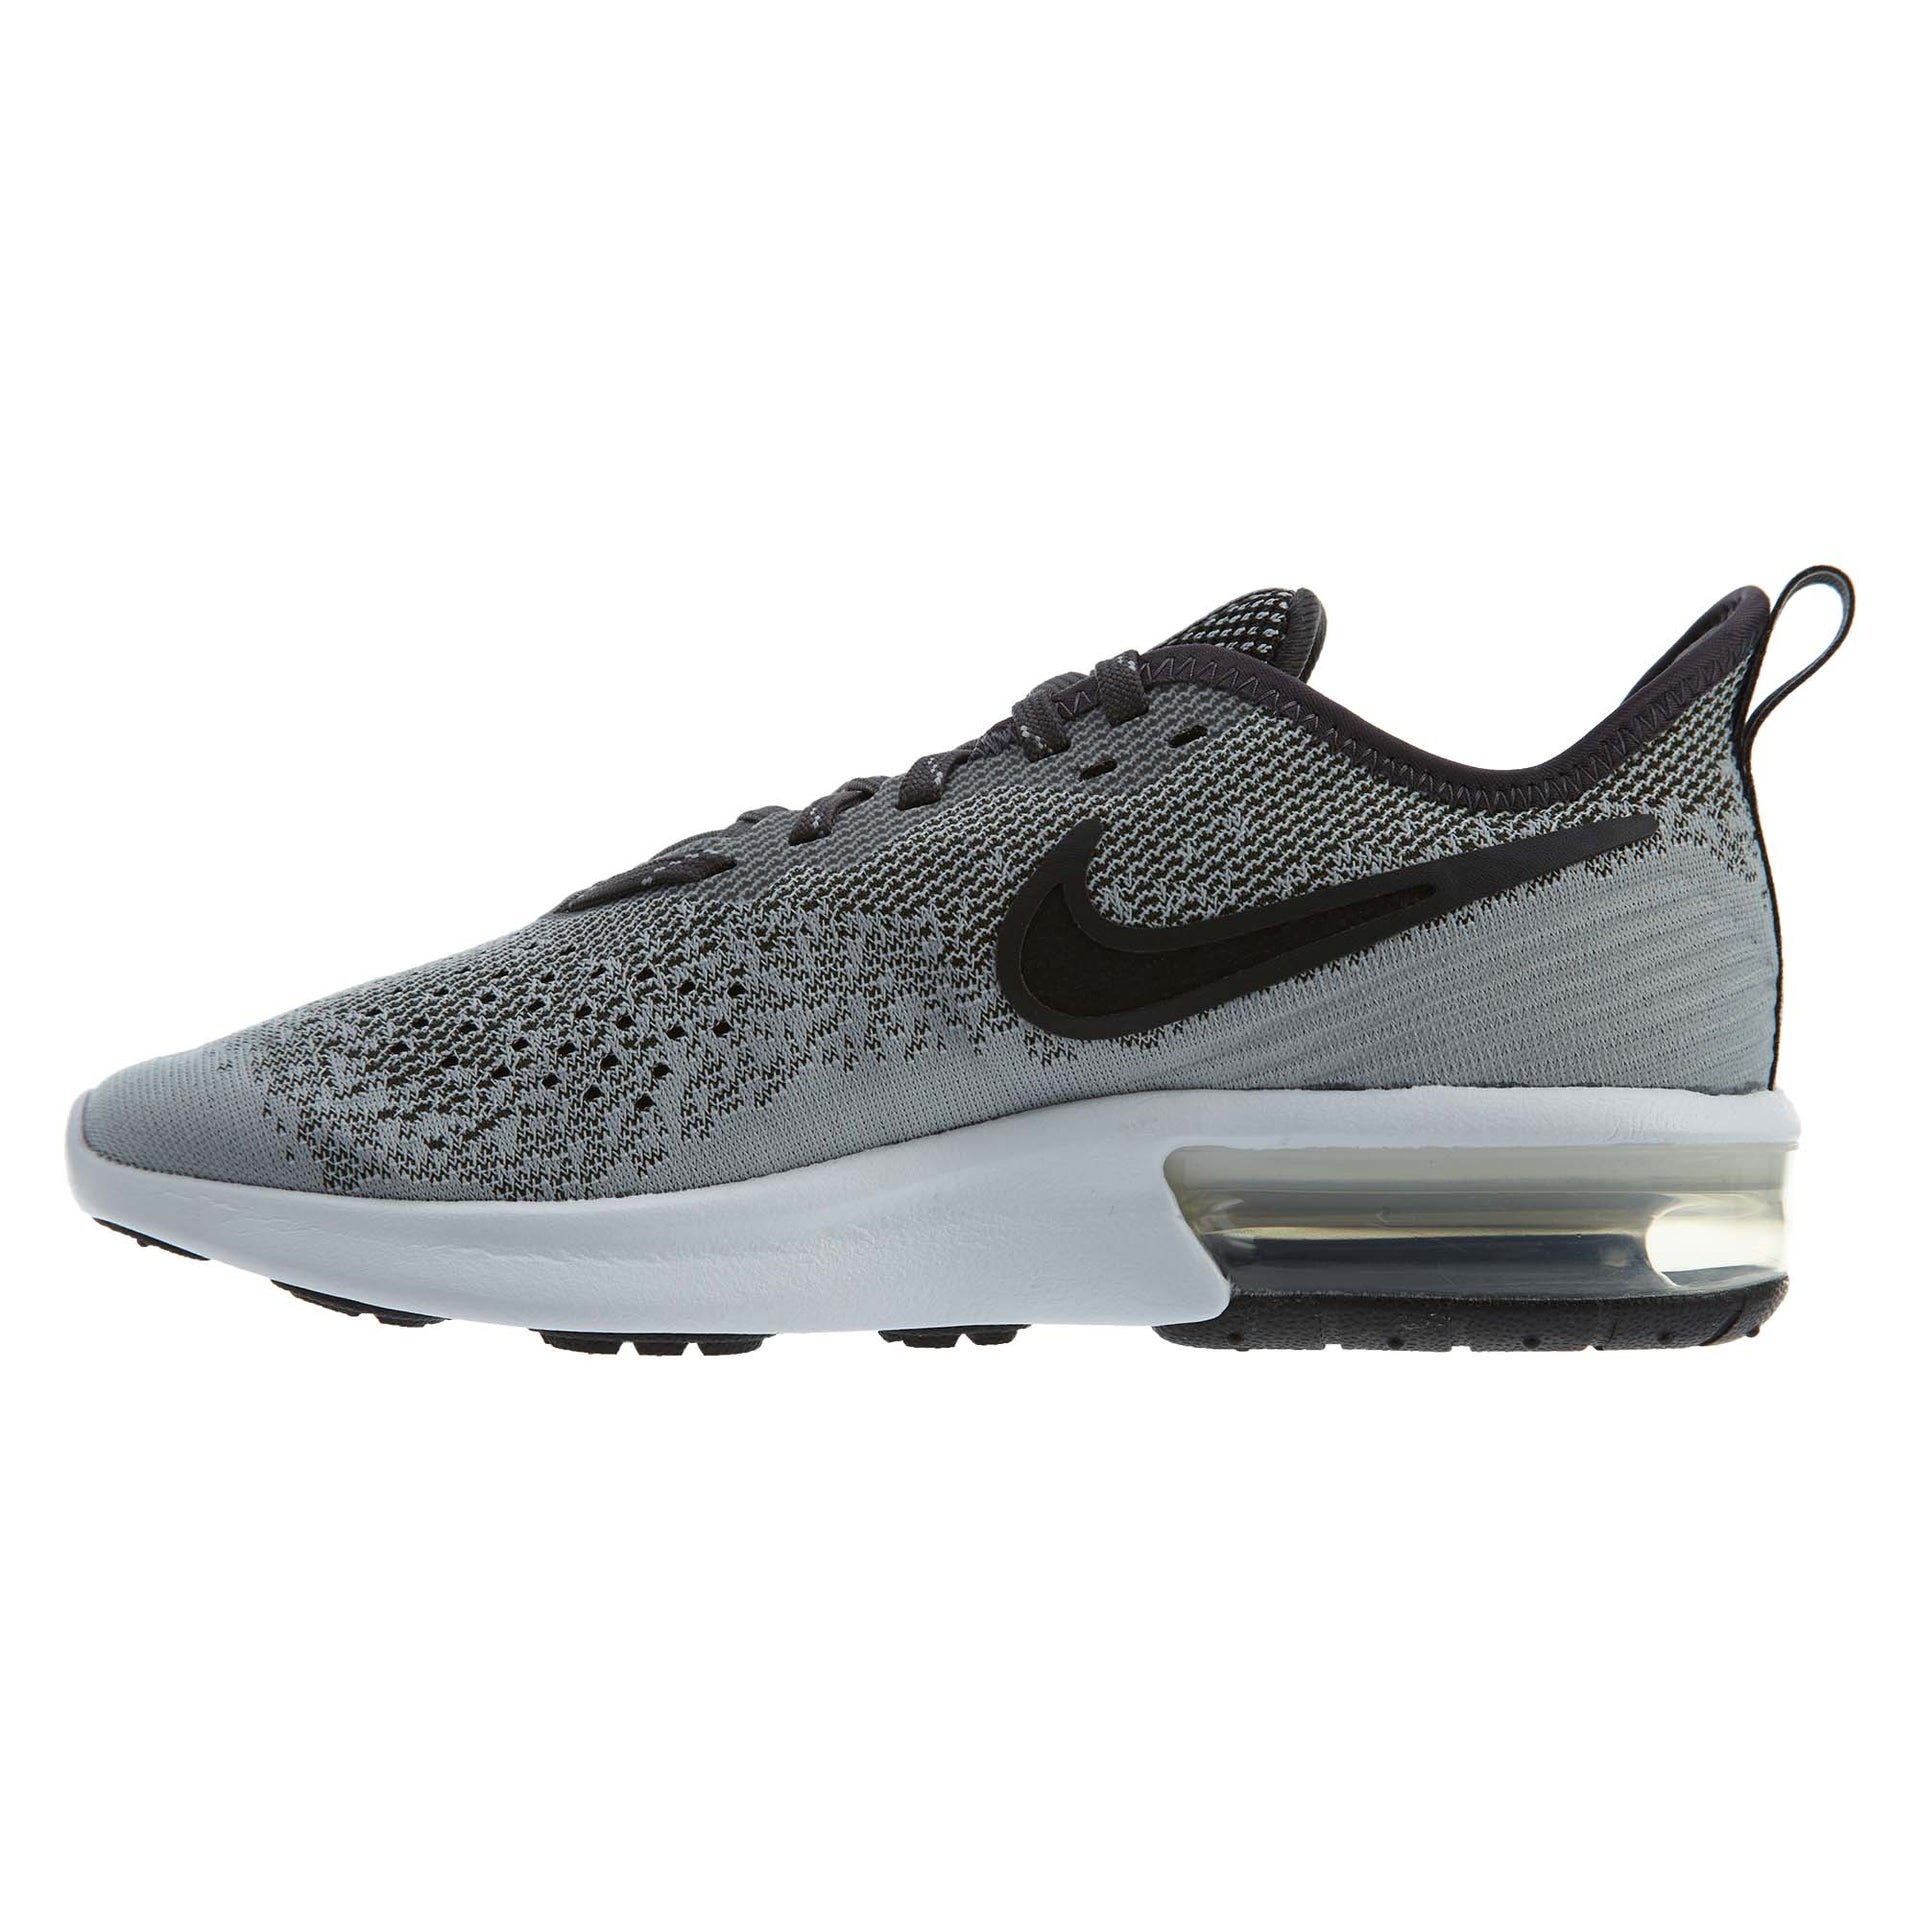 Nike Air Max Sequent 4 Black/Black-White Womens Style :AO4486